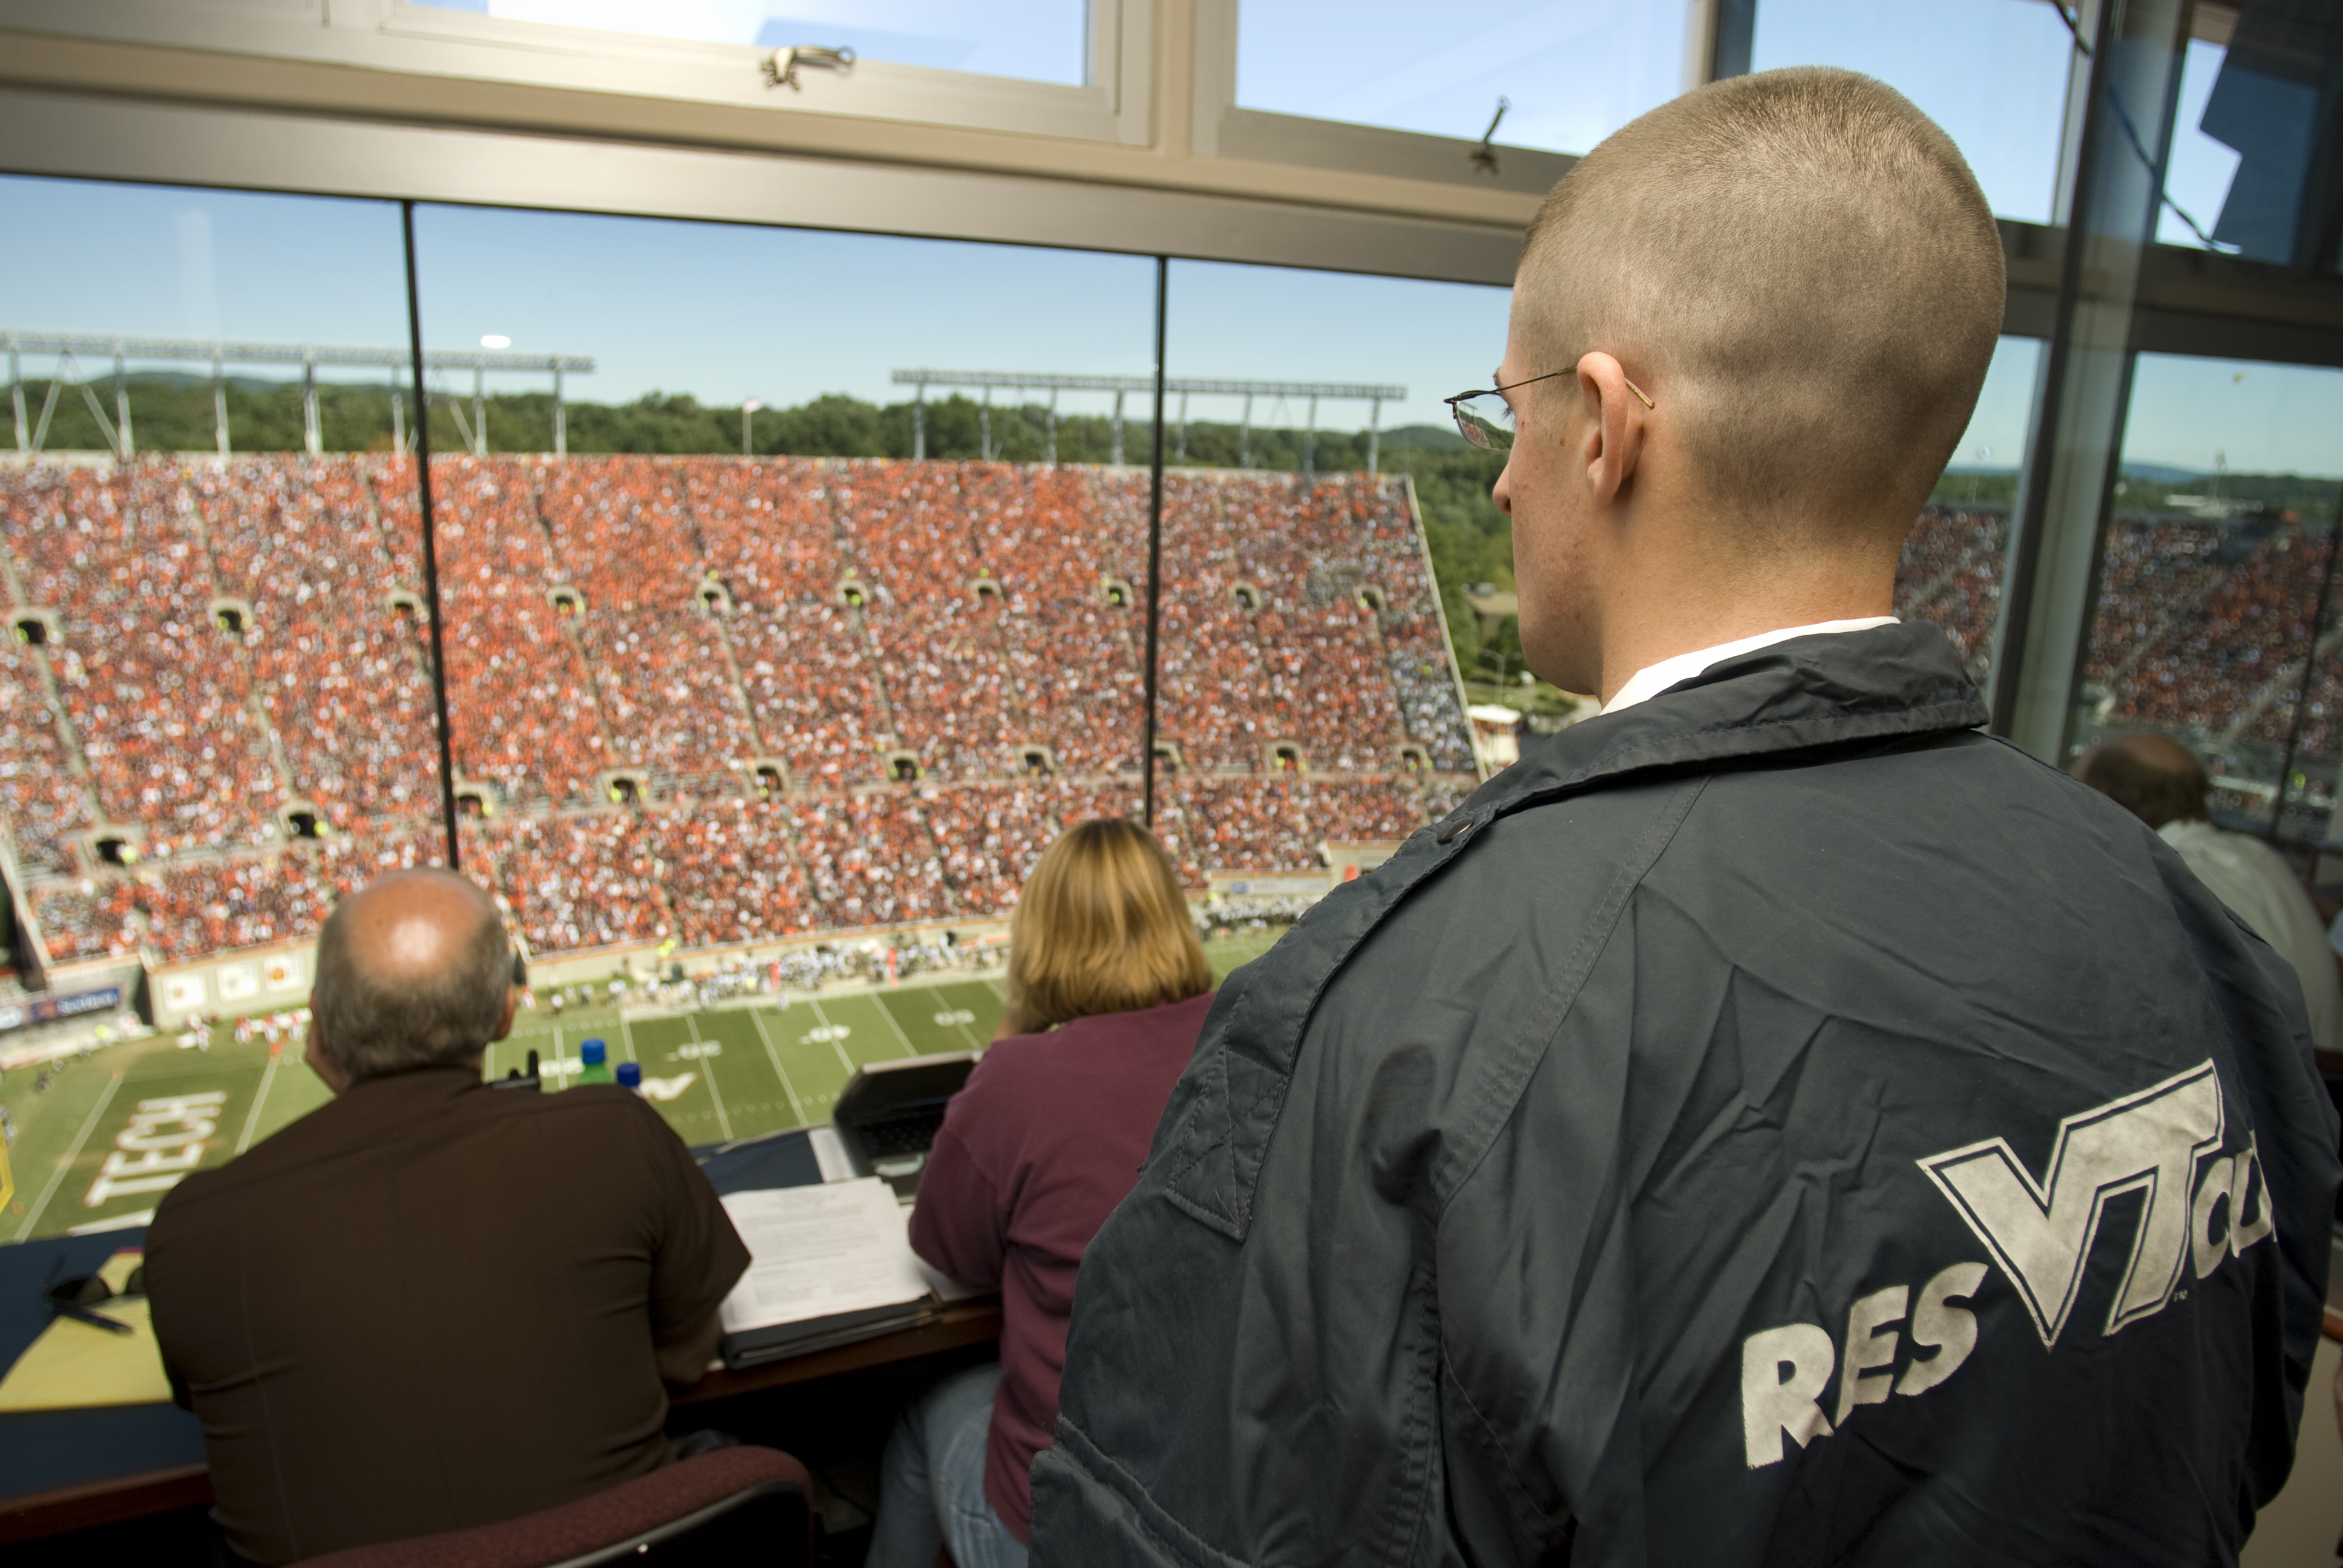 VT rescue squad personnel overlook the crowd at Lane Stadium during a home football game.